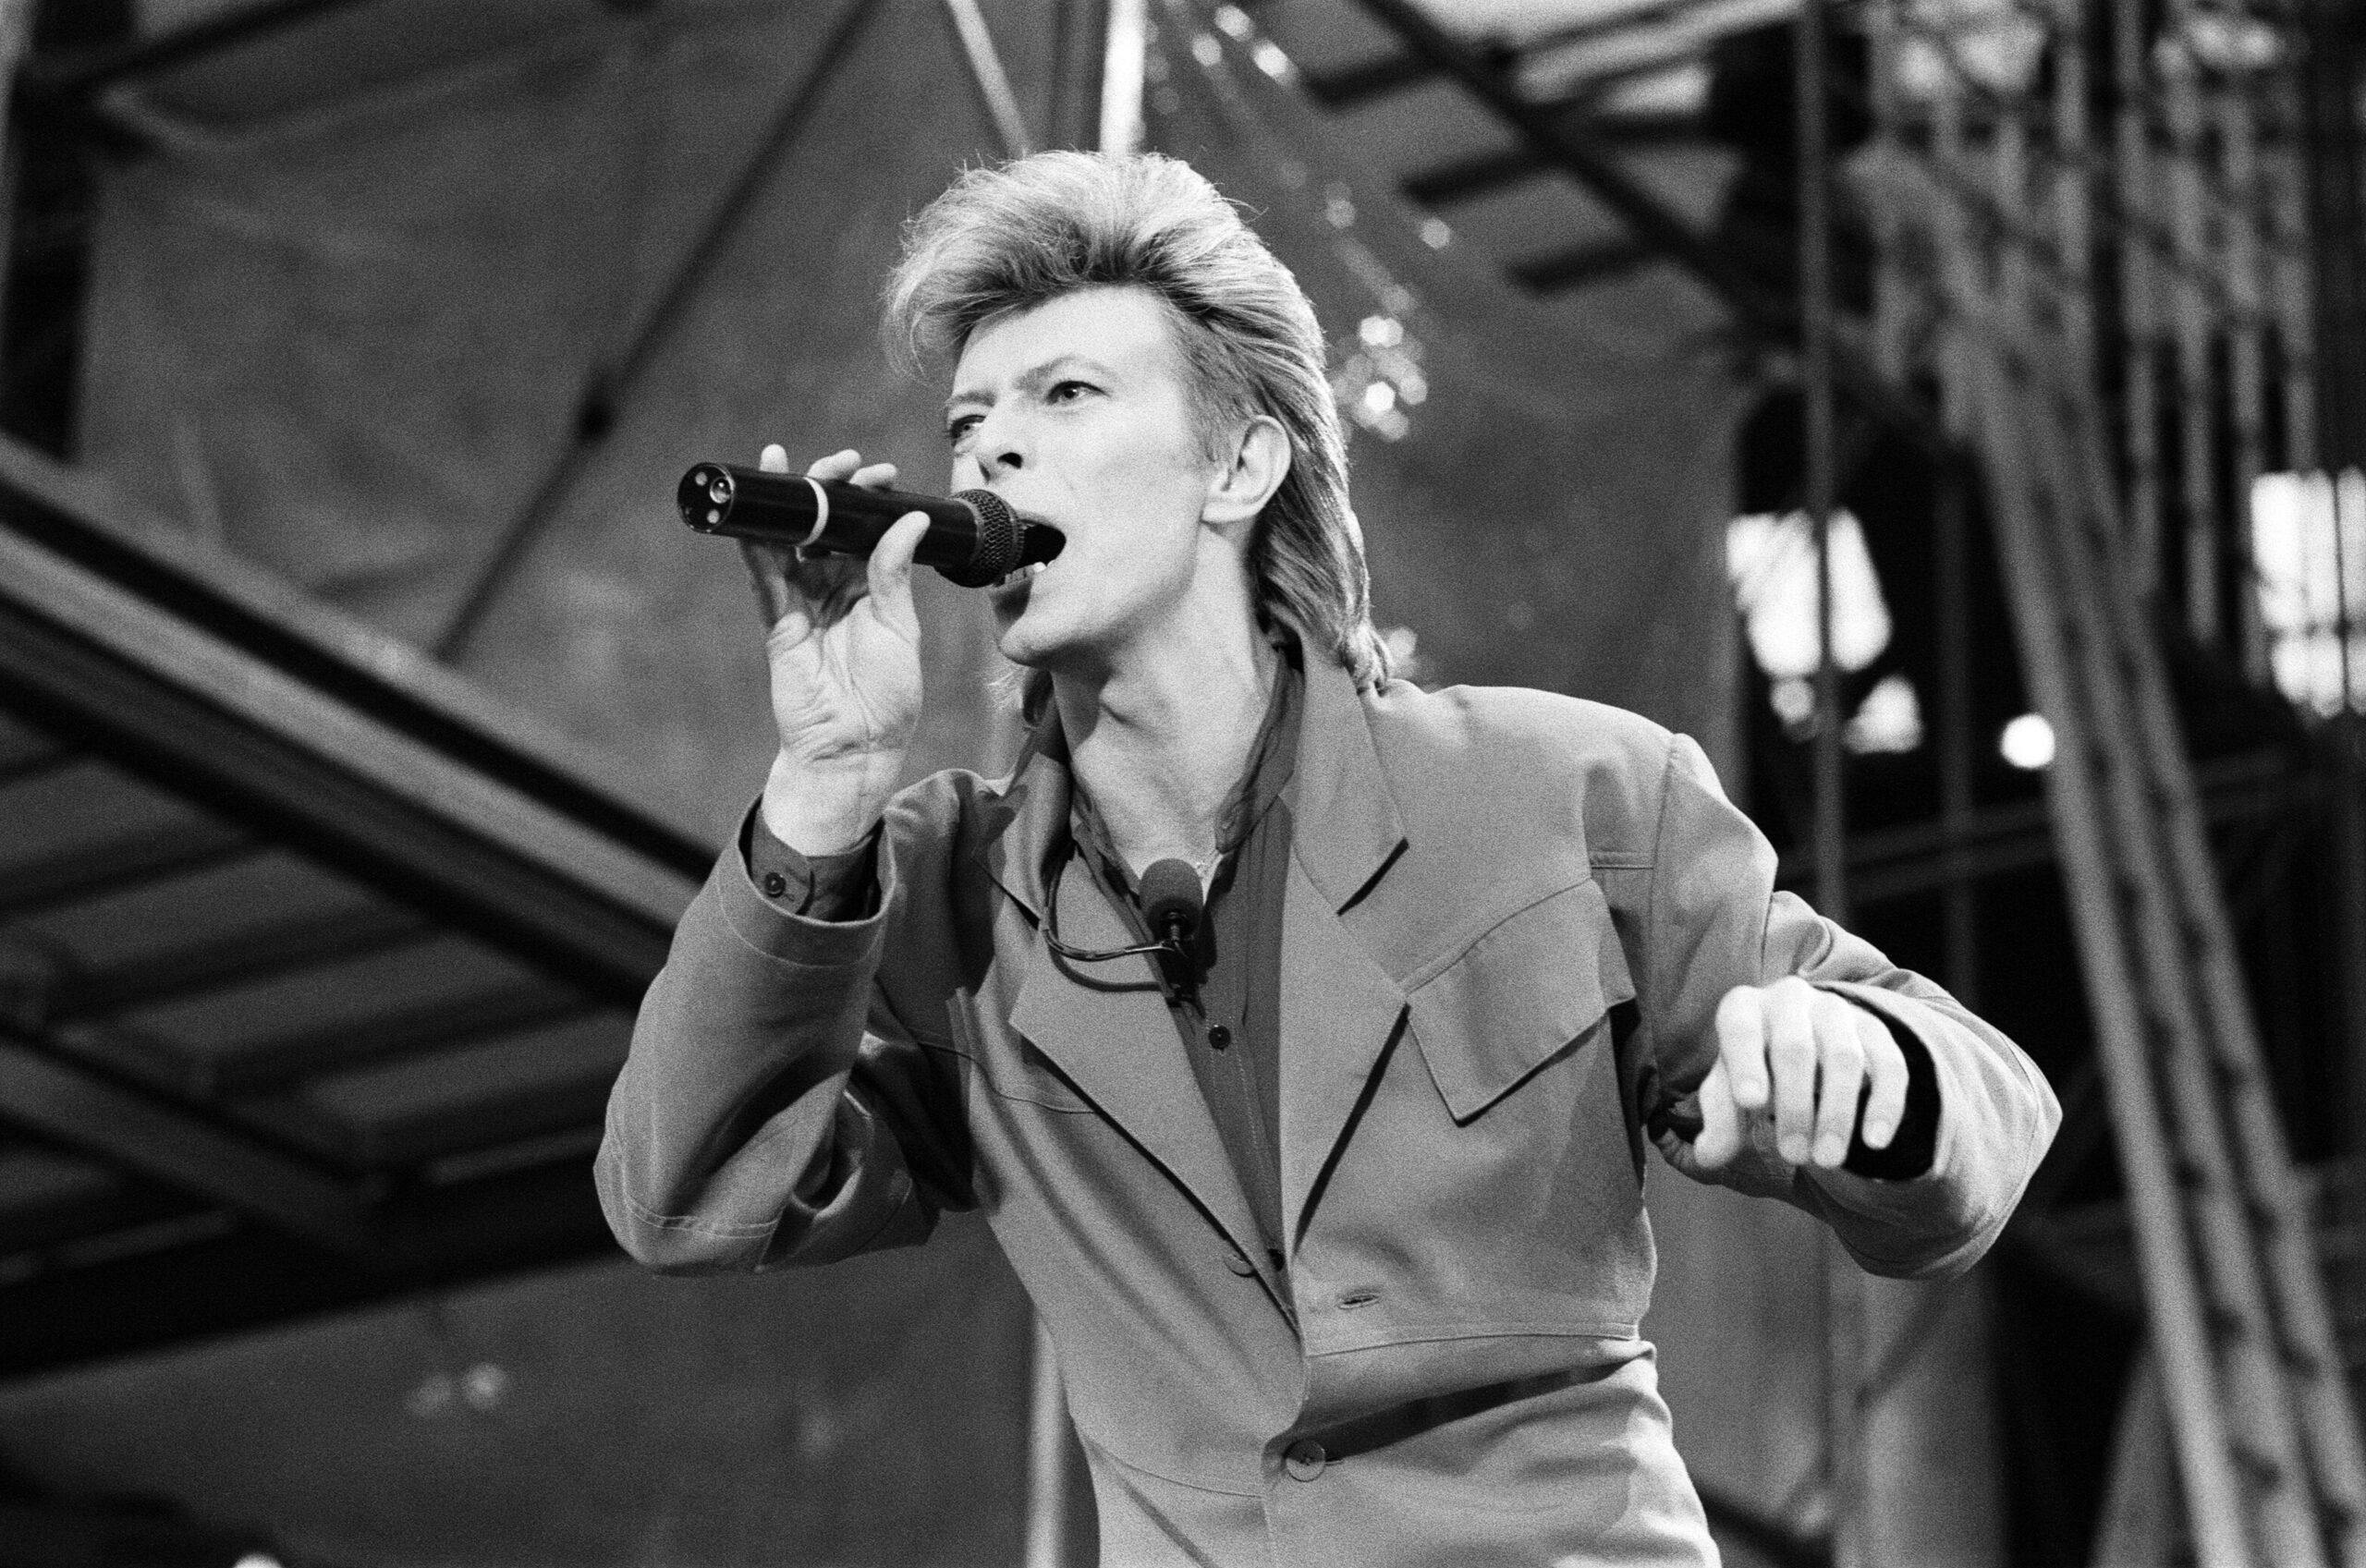 David Bowie performing in 1987